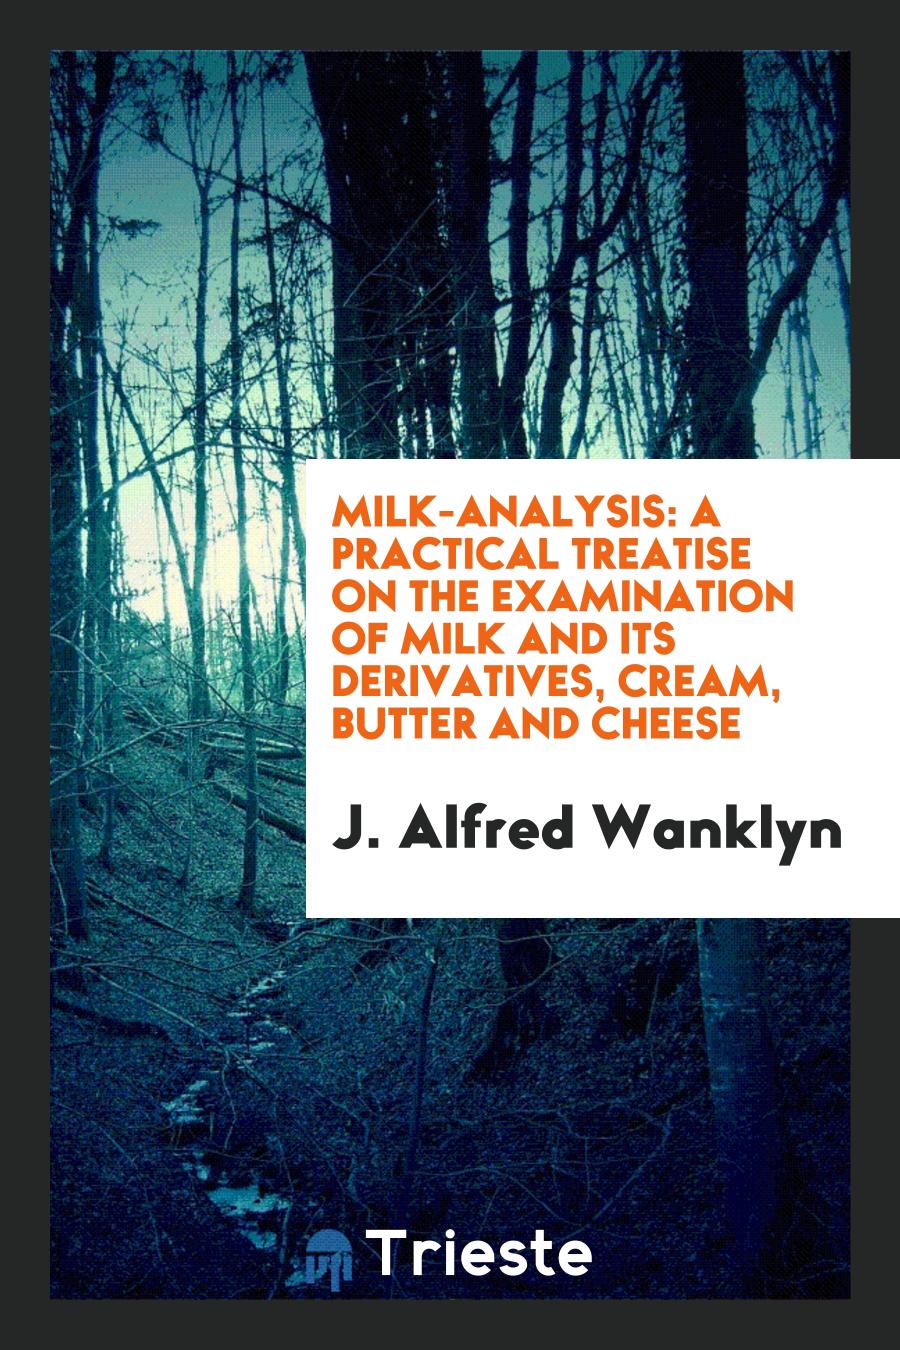 Milk-Analysis: A Practical Treatise on the Examination of Milk and Its Derivatives, Cream, Butter and Cheese